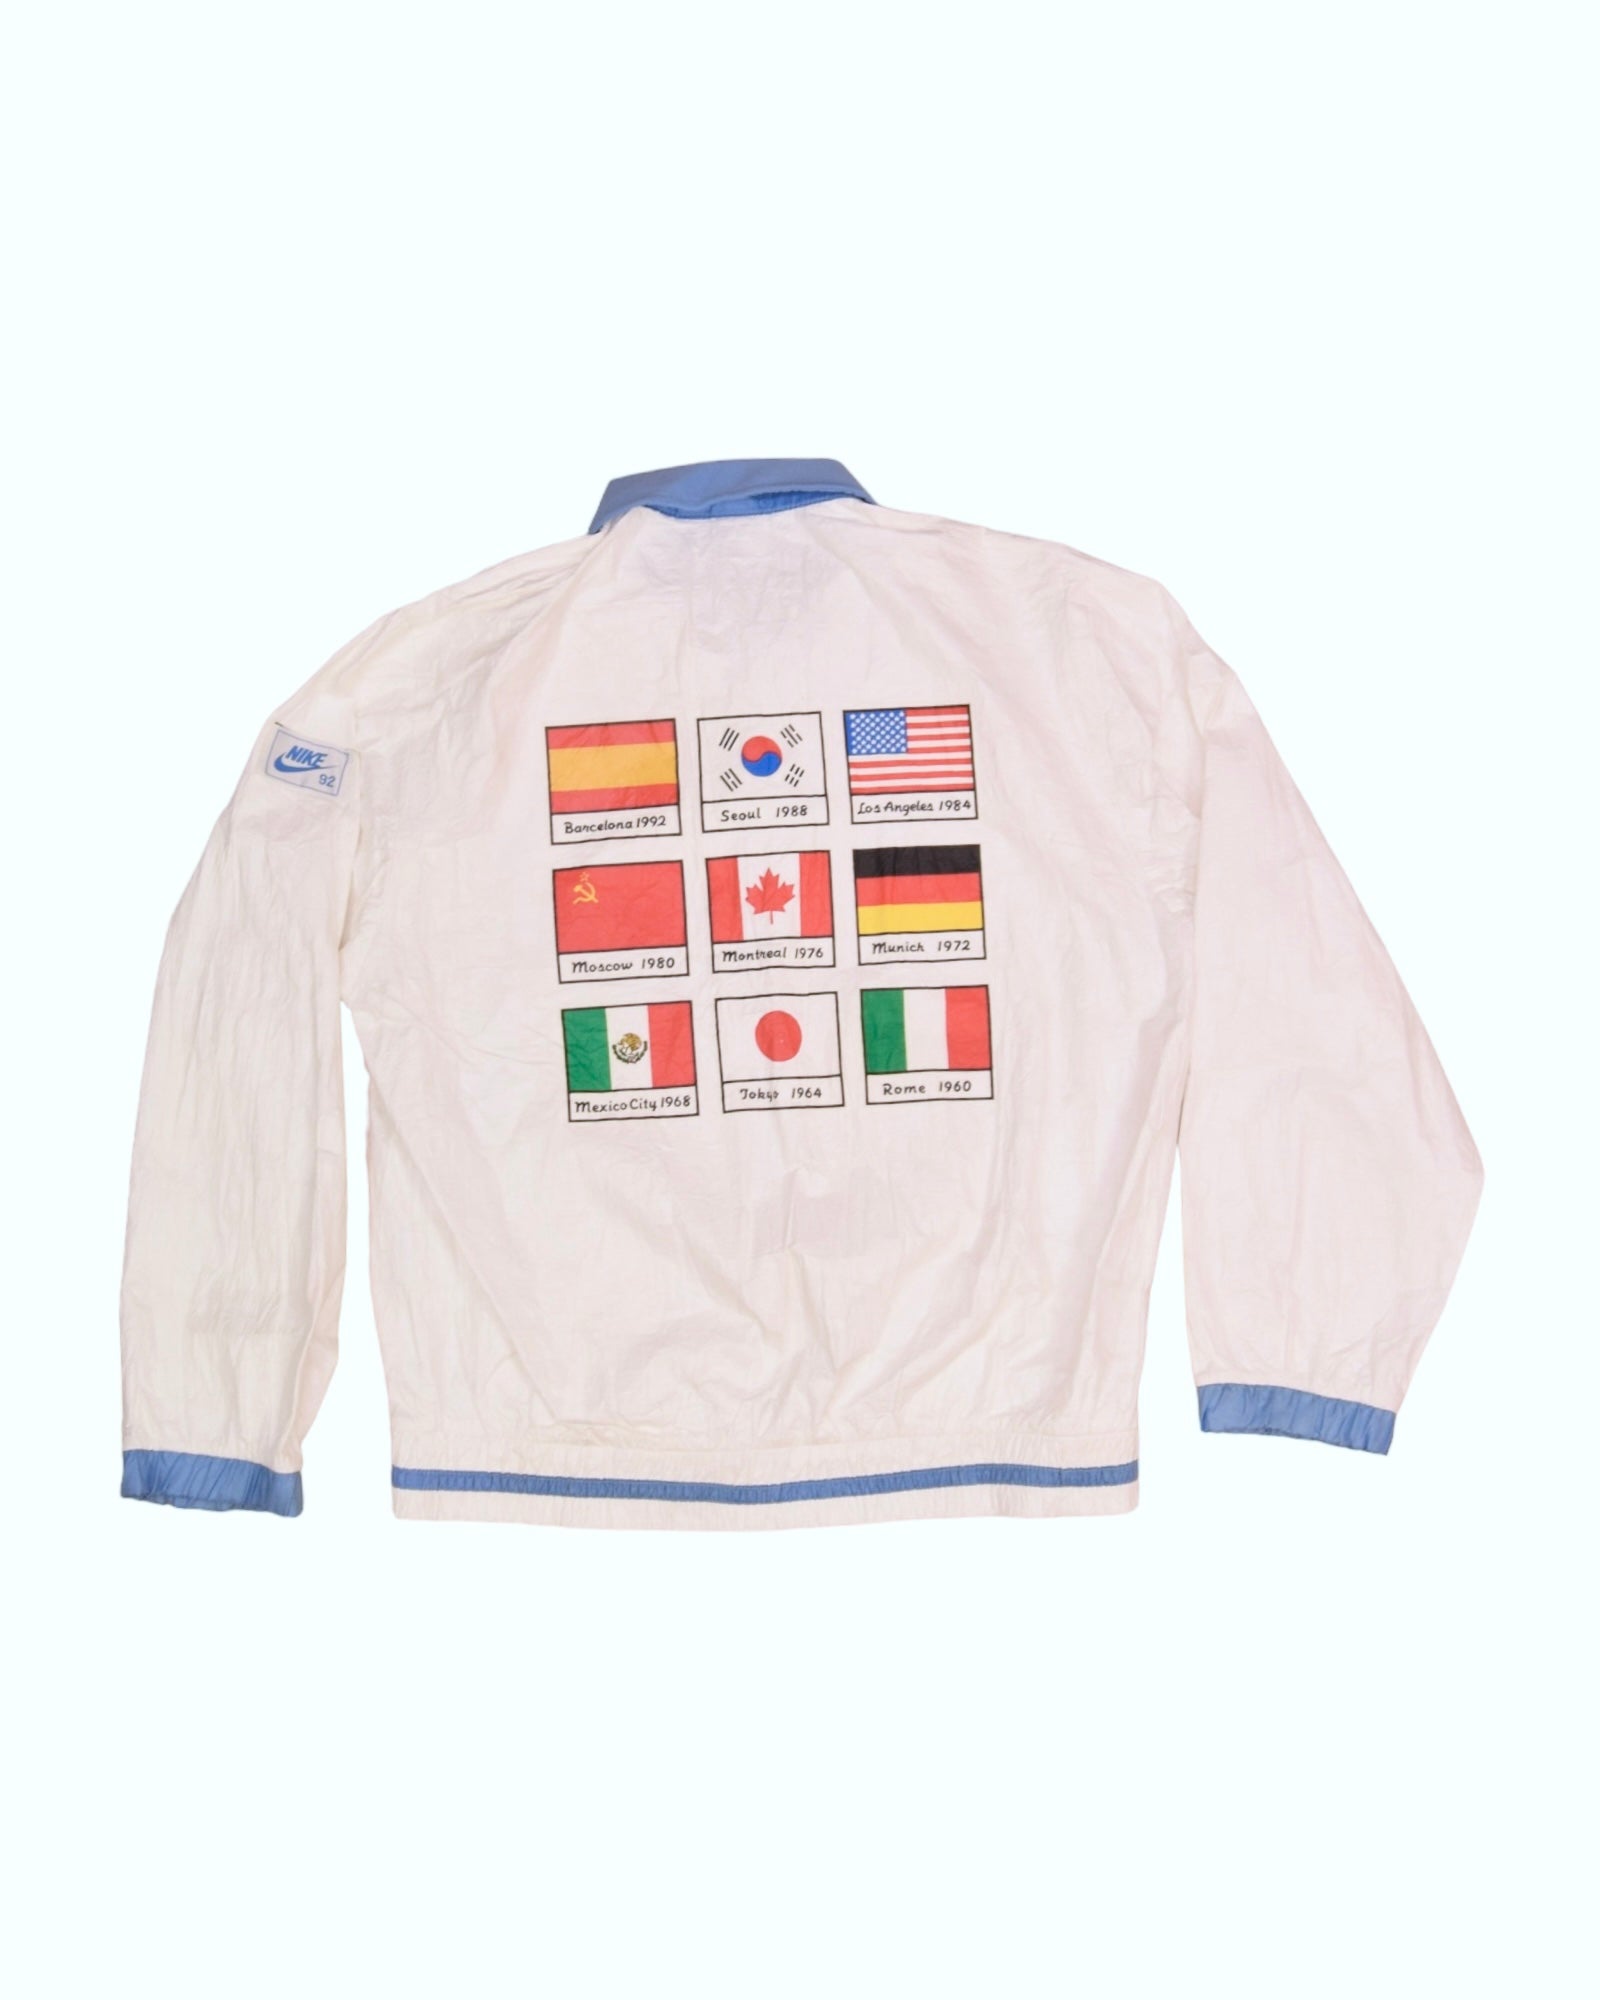 Vintage Nike 1992 Olympics Jacket Size L Made in Korea White Barcelona 1992 Seoul 1988 Los Angeles 1984 Moscow 1980 Montreal 1976 Munich 1972 Mexico City 1968 Tokyo 1964 Rome 1960